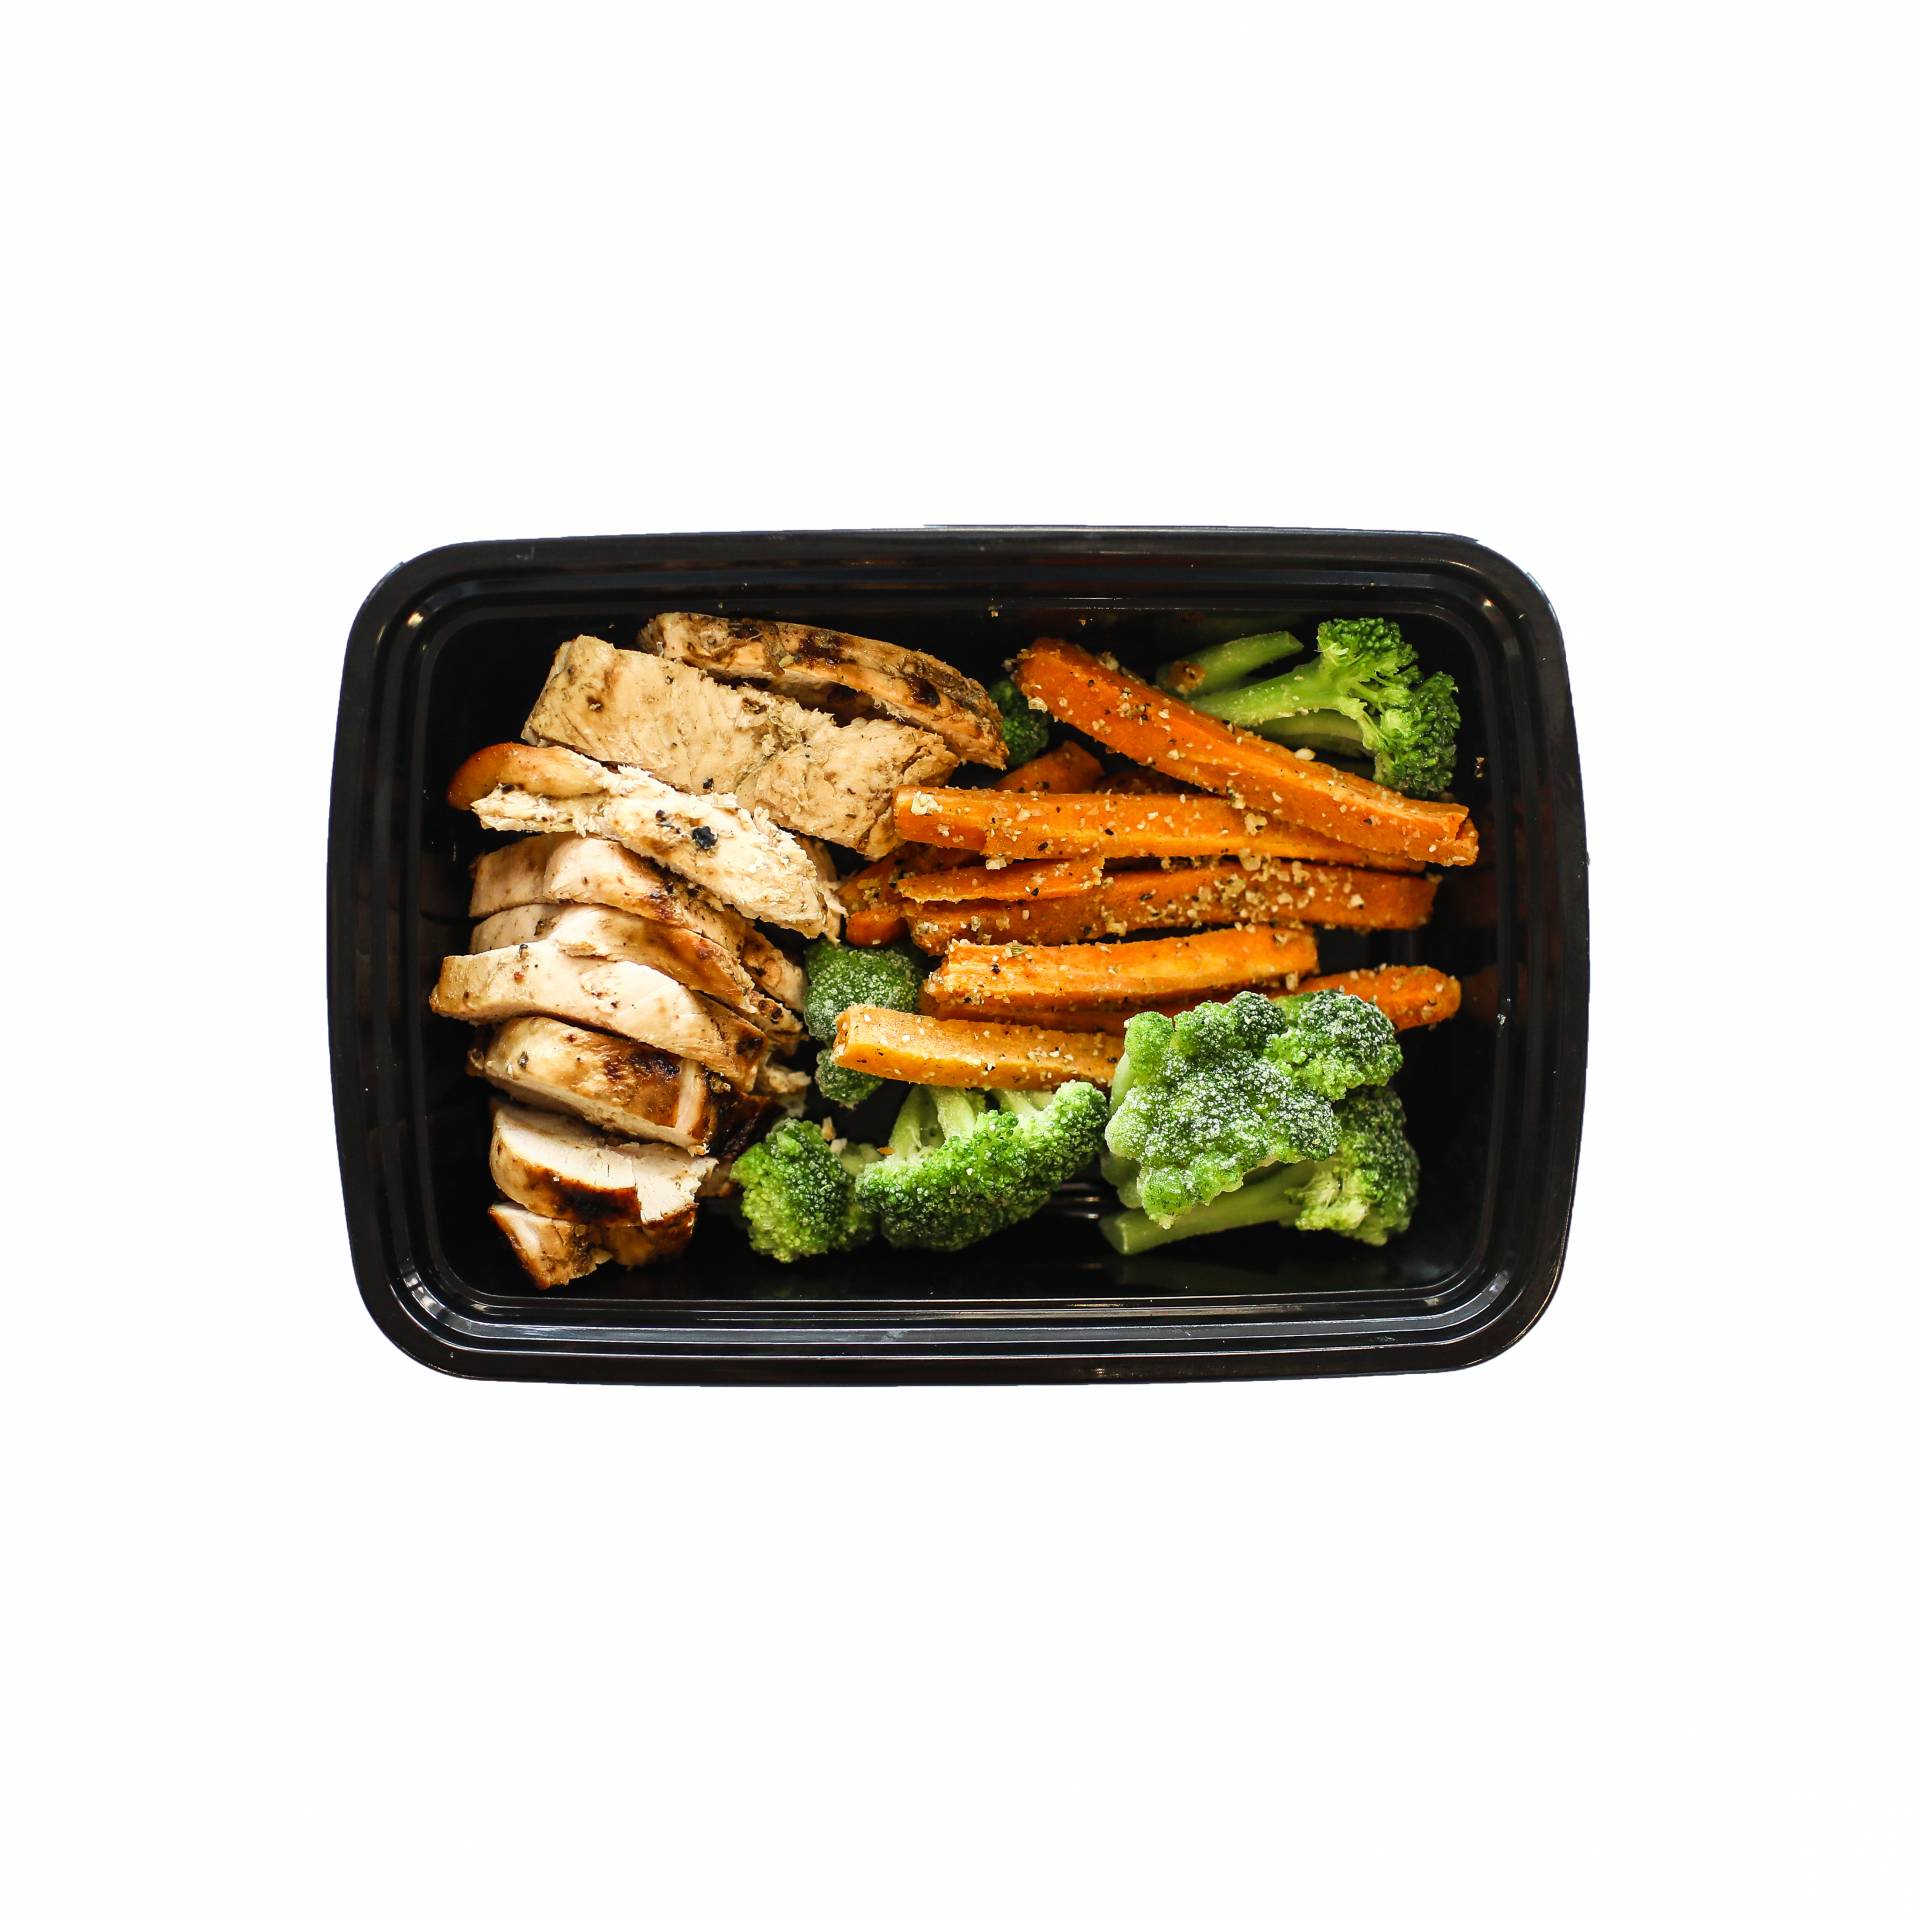 Grilled Chicken with Broccoli & Carrots